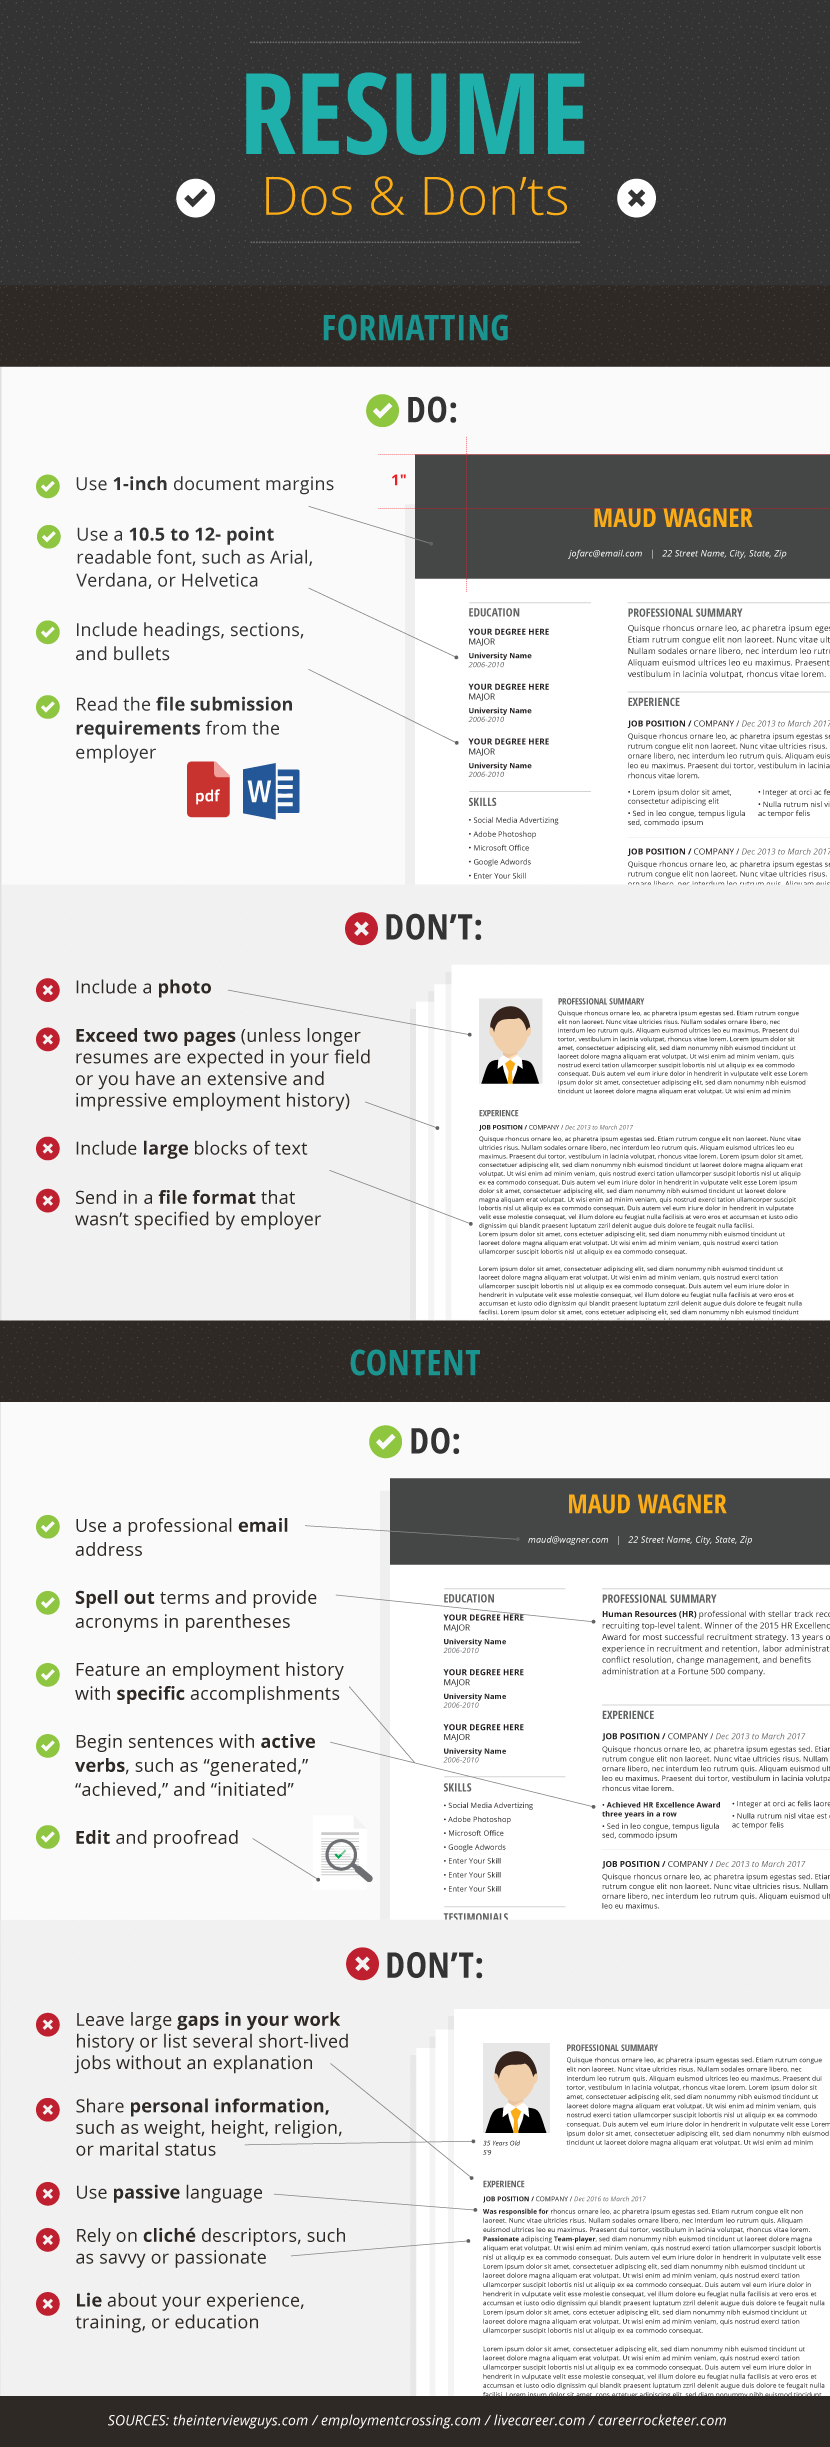 Resume Do's - Resume Dos and Don'ts: How to Get the Interview